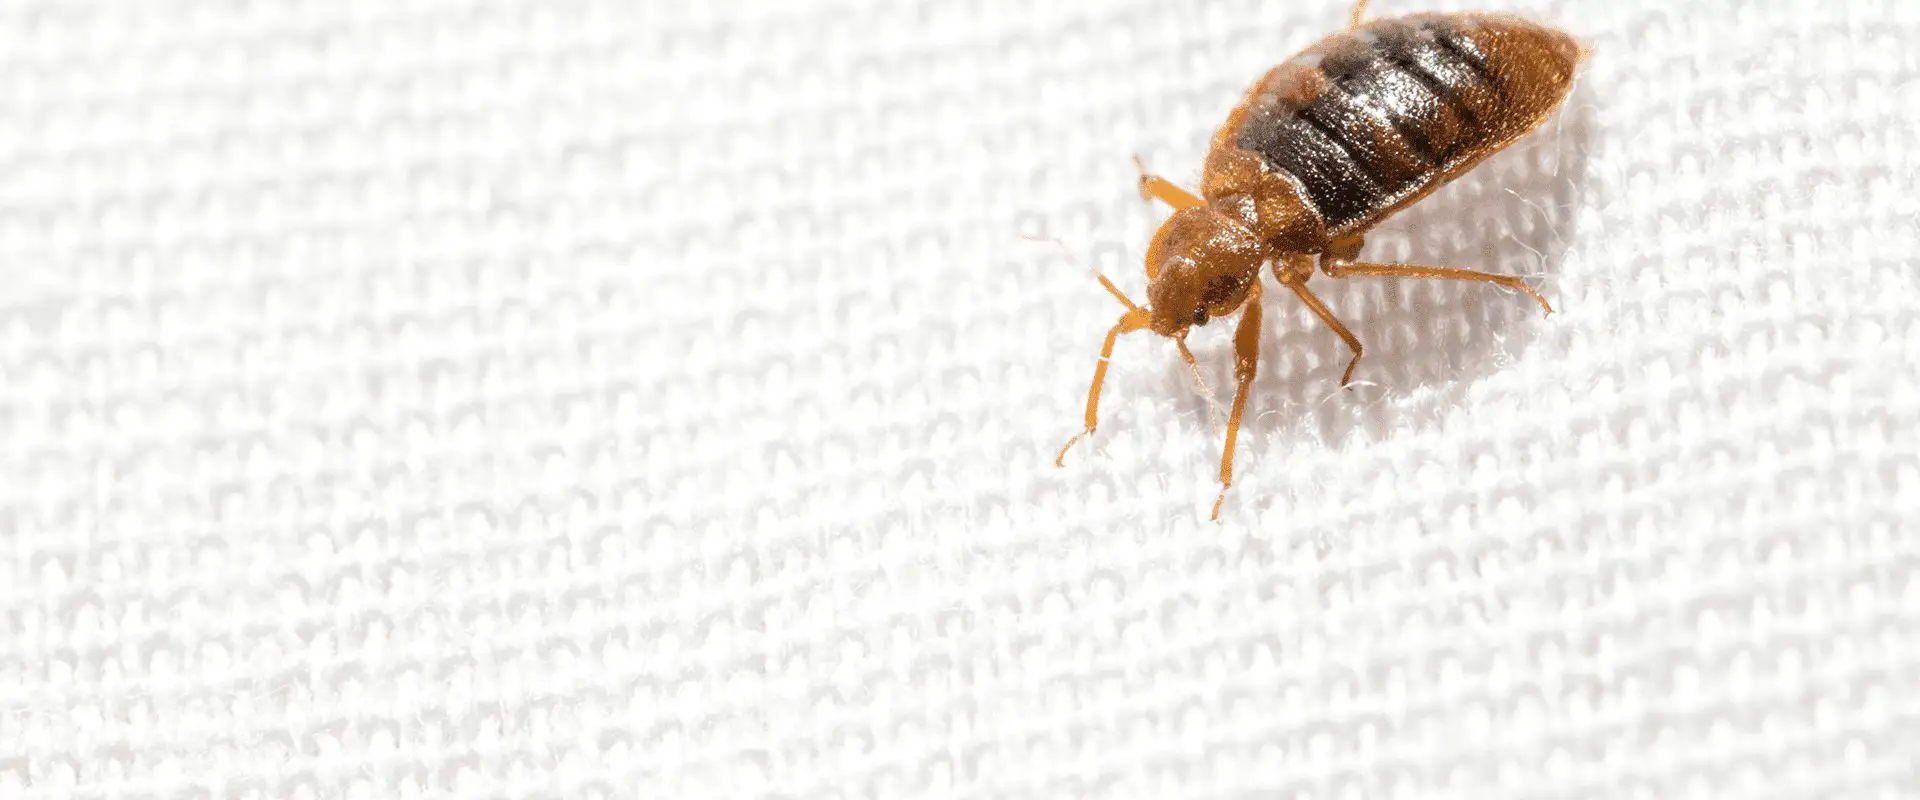 Do Bed Bugs Give Rashes?